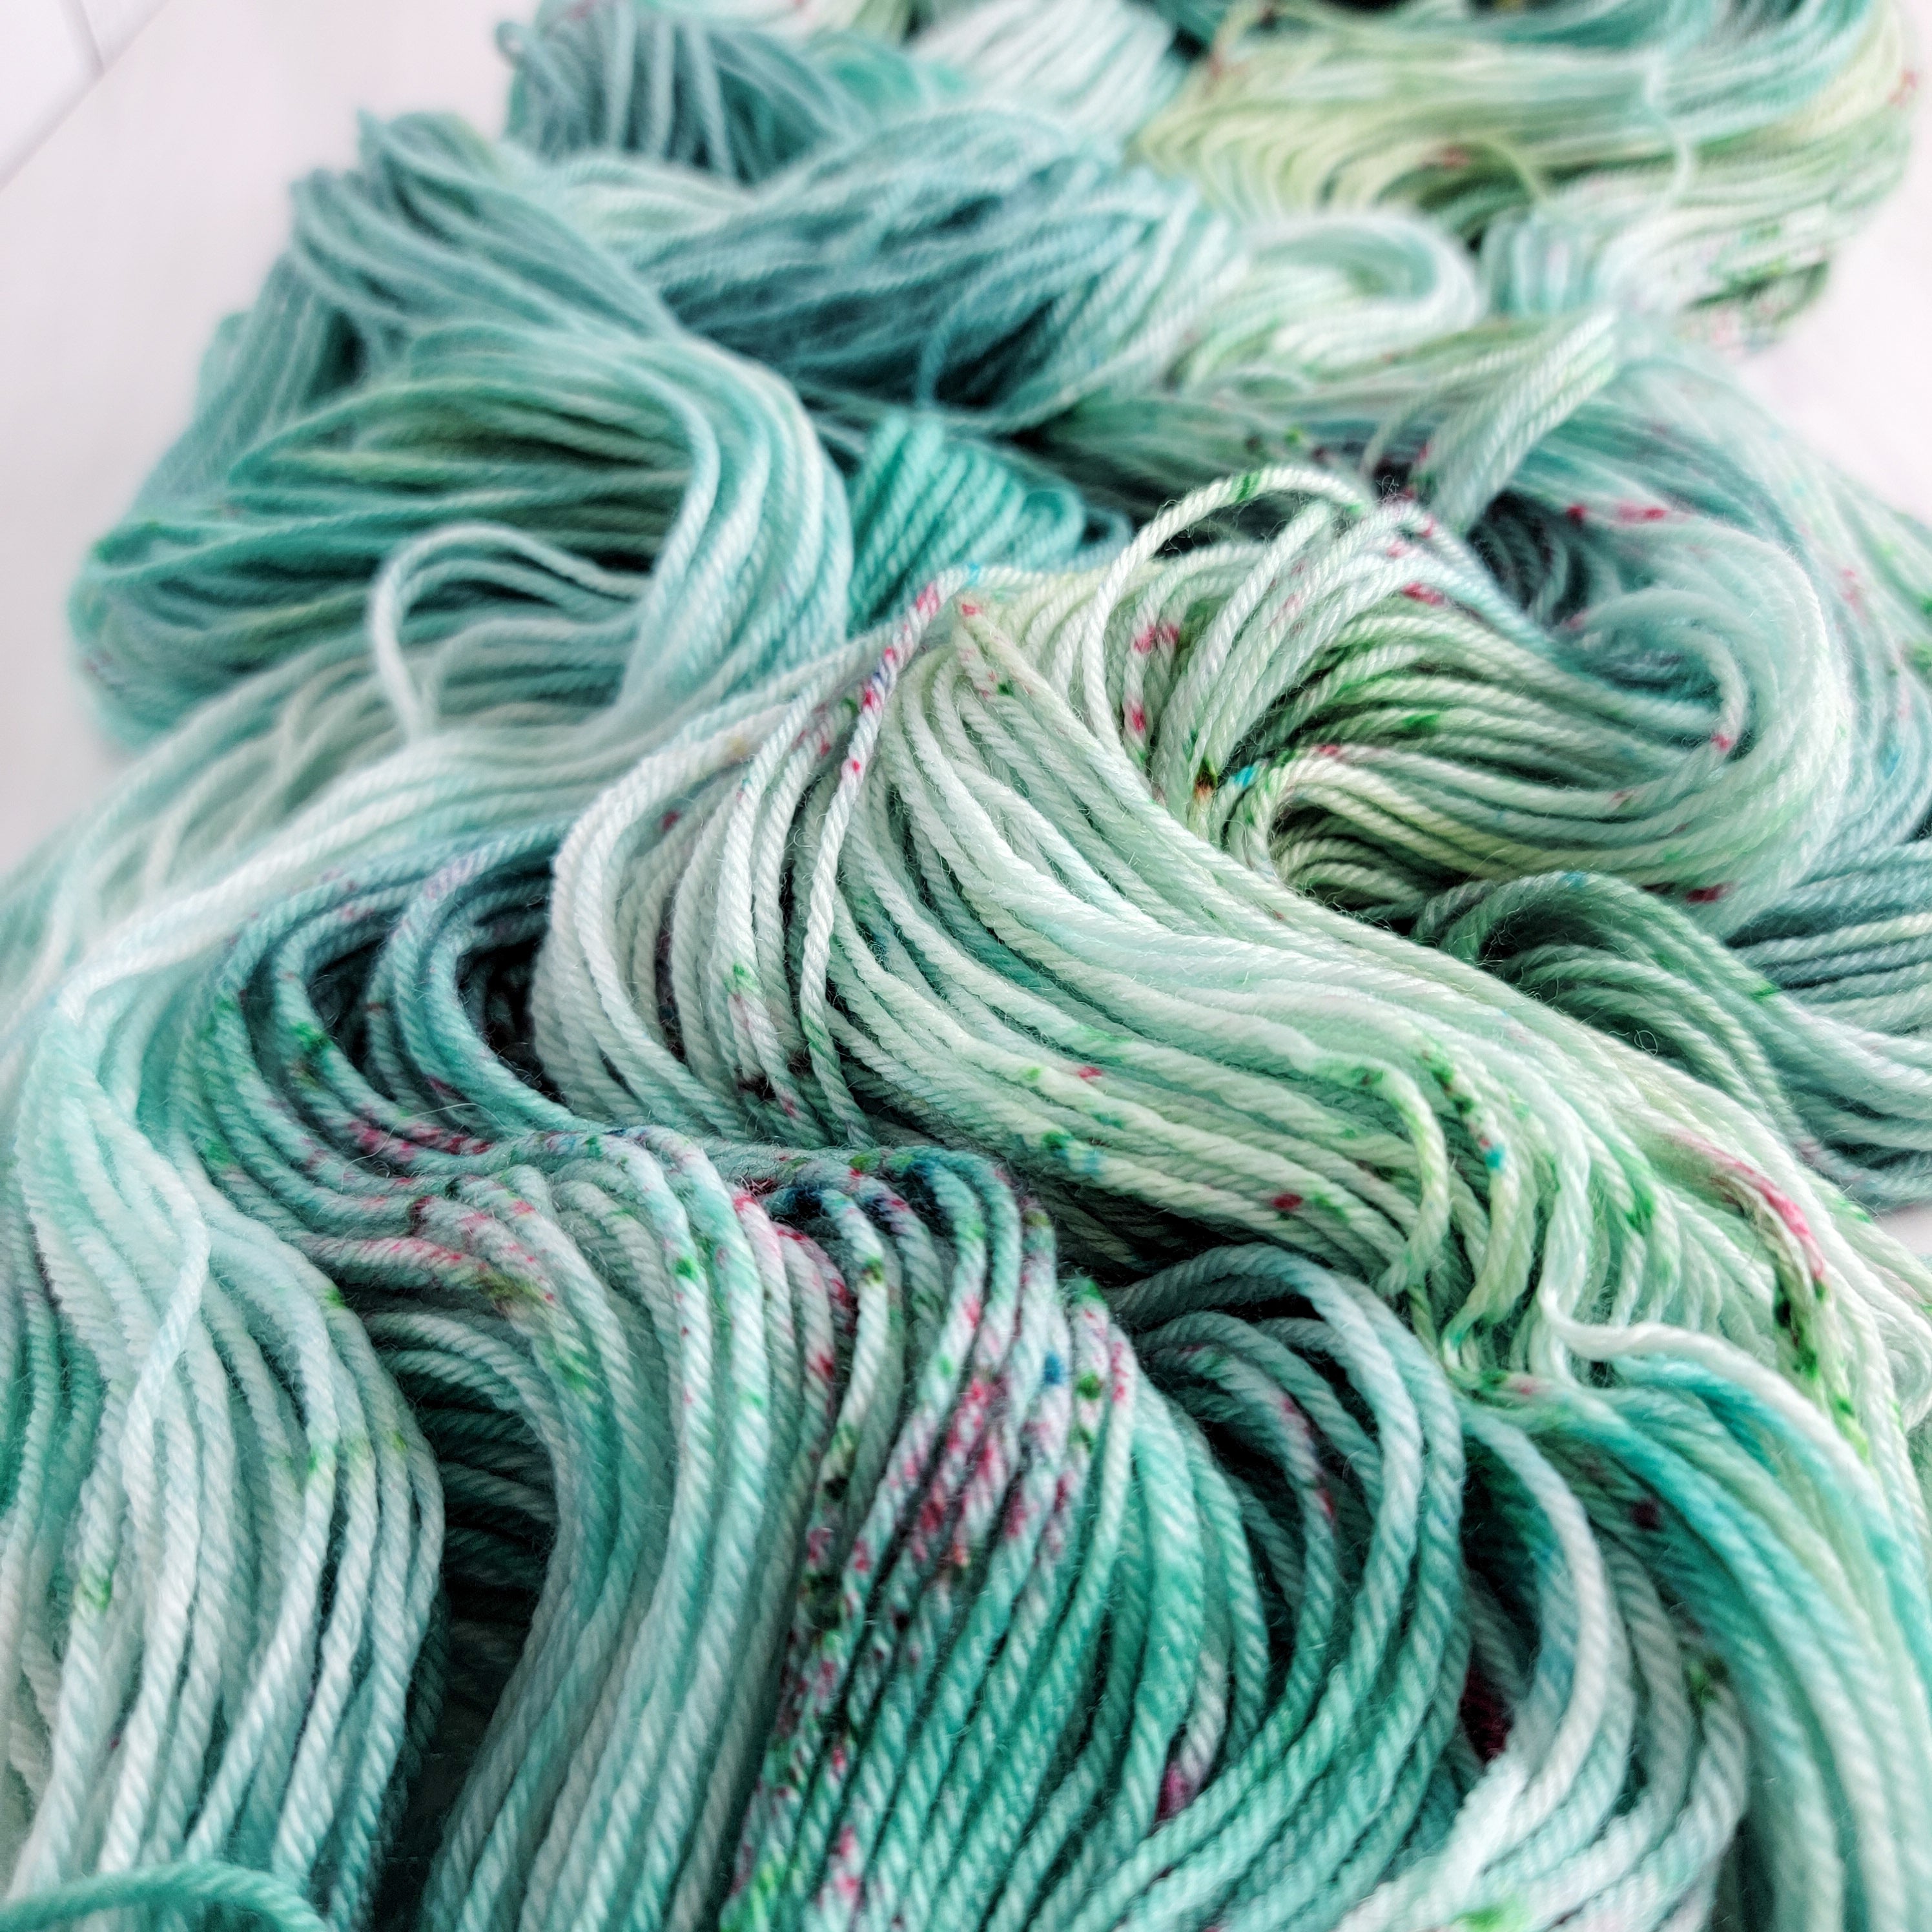 Speckled Yarn - Dyed to Order - will ship in 3-6 weeks